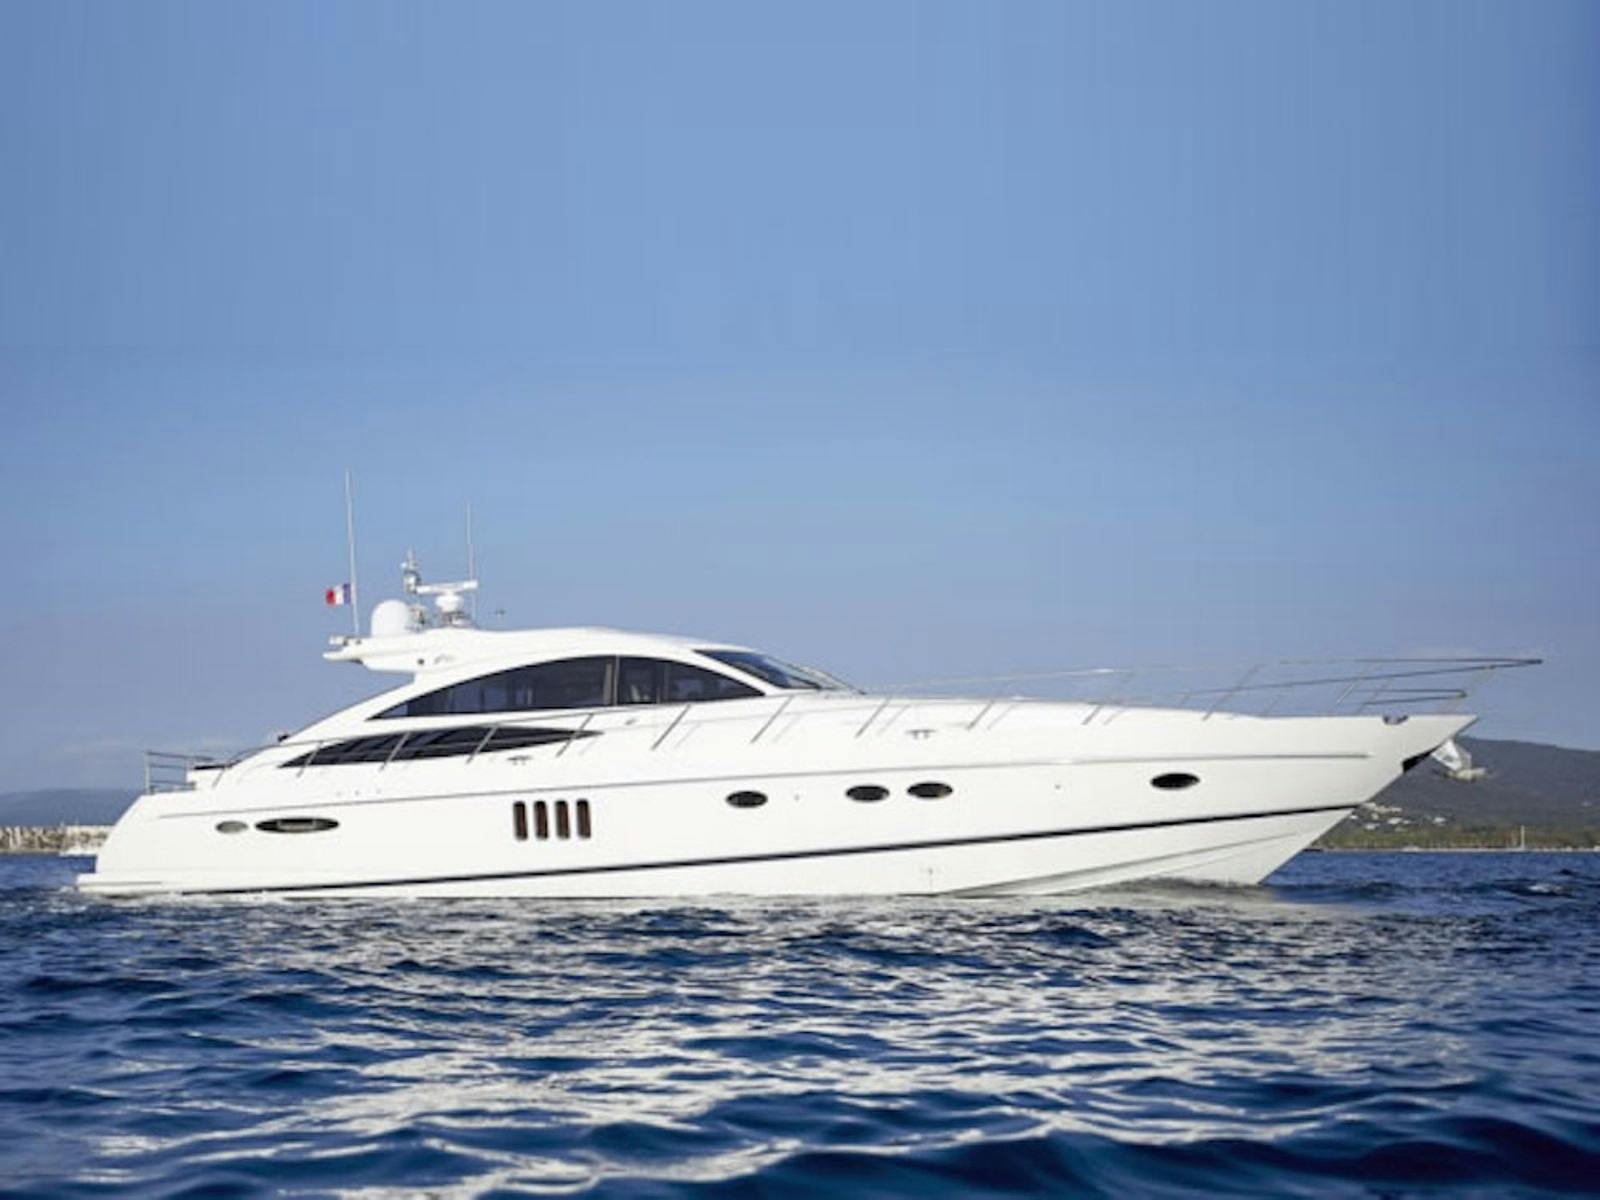 Book Princess V70 Motor yacht for bareboat charter in Athens, Agios Kosmas marina, Athens area/Saronic/Peloponese, Greece with TripYacht!, picture 1